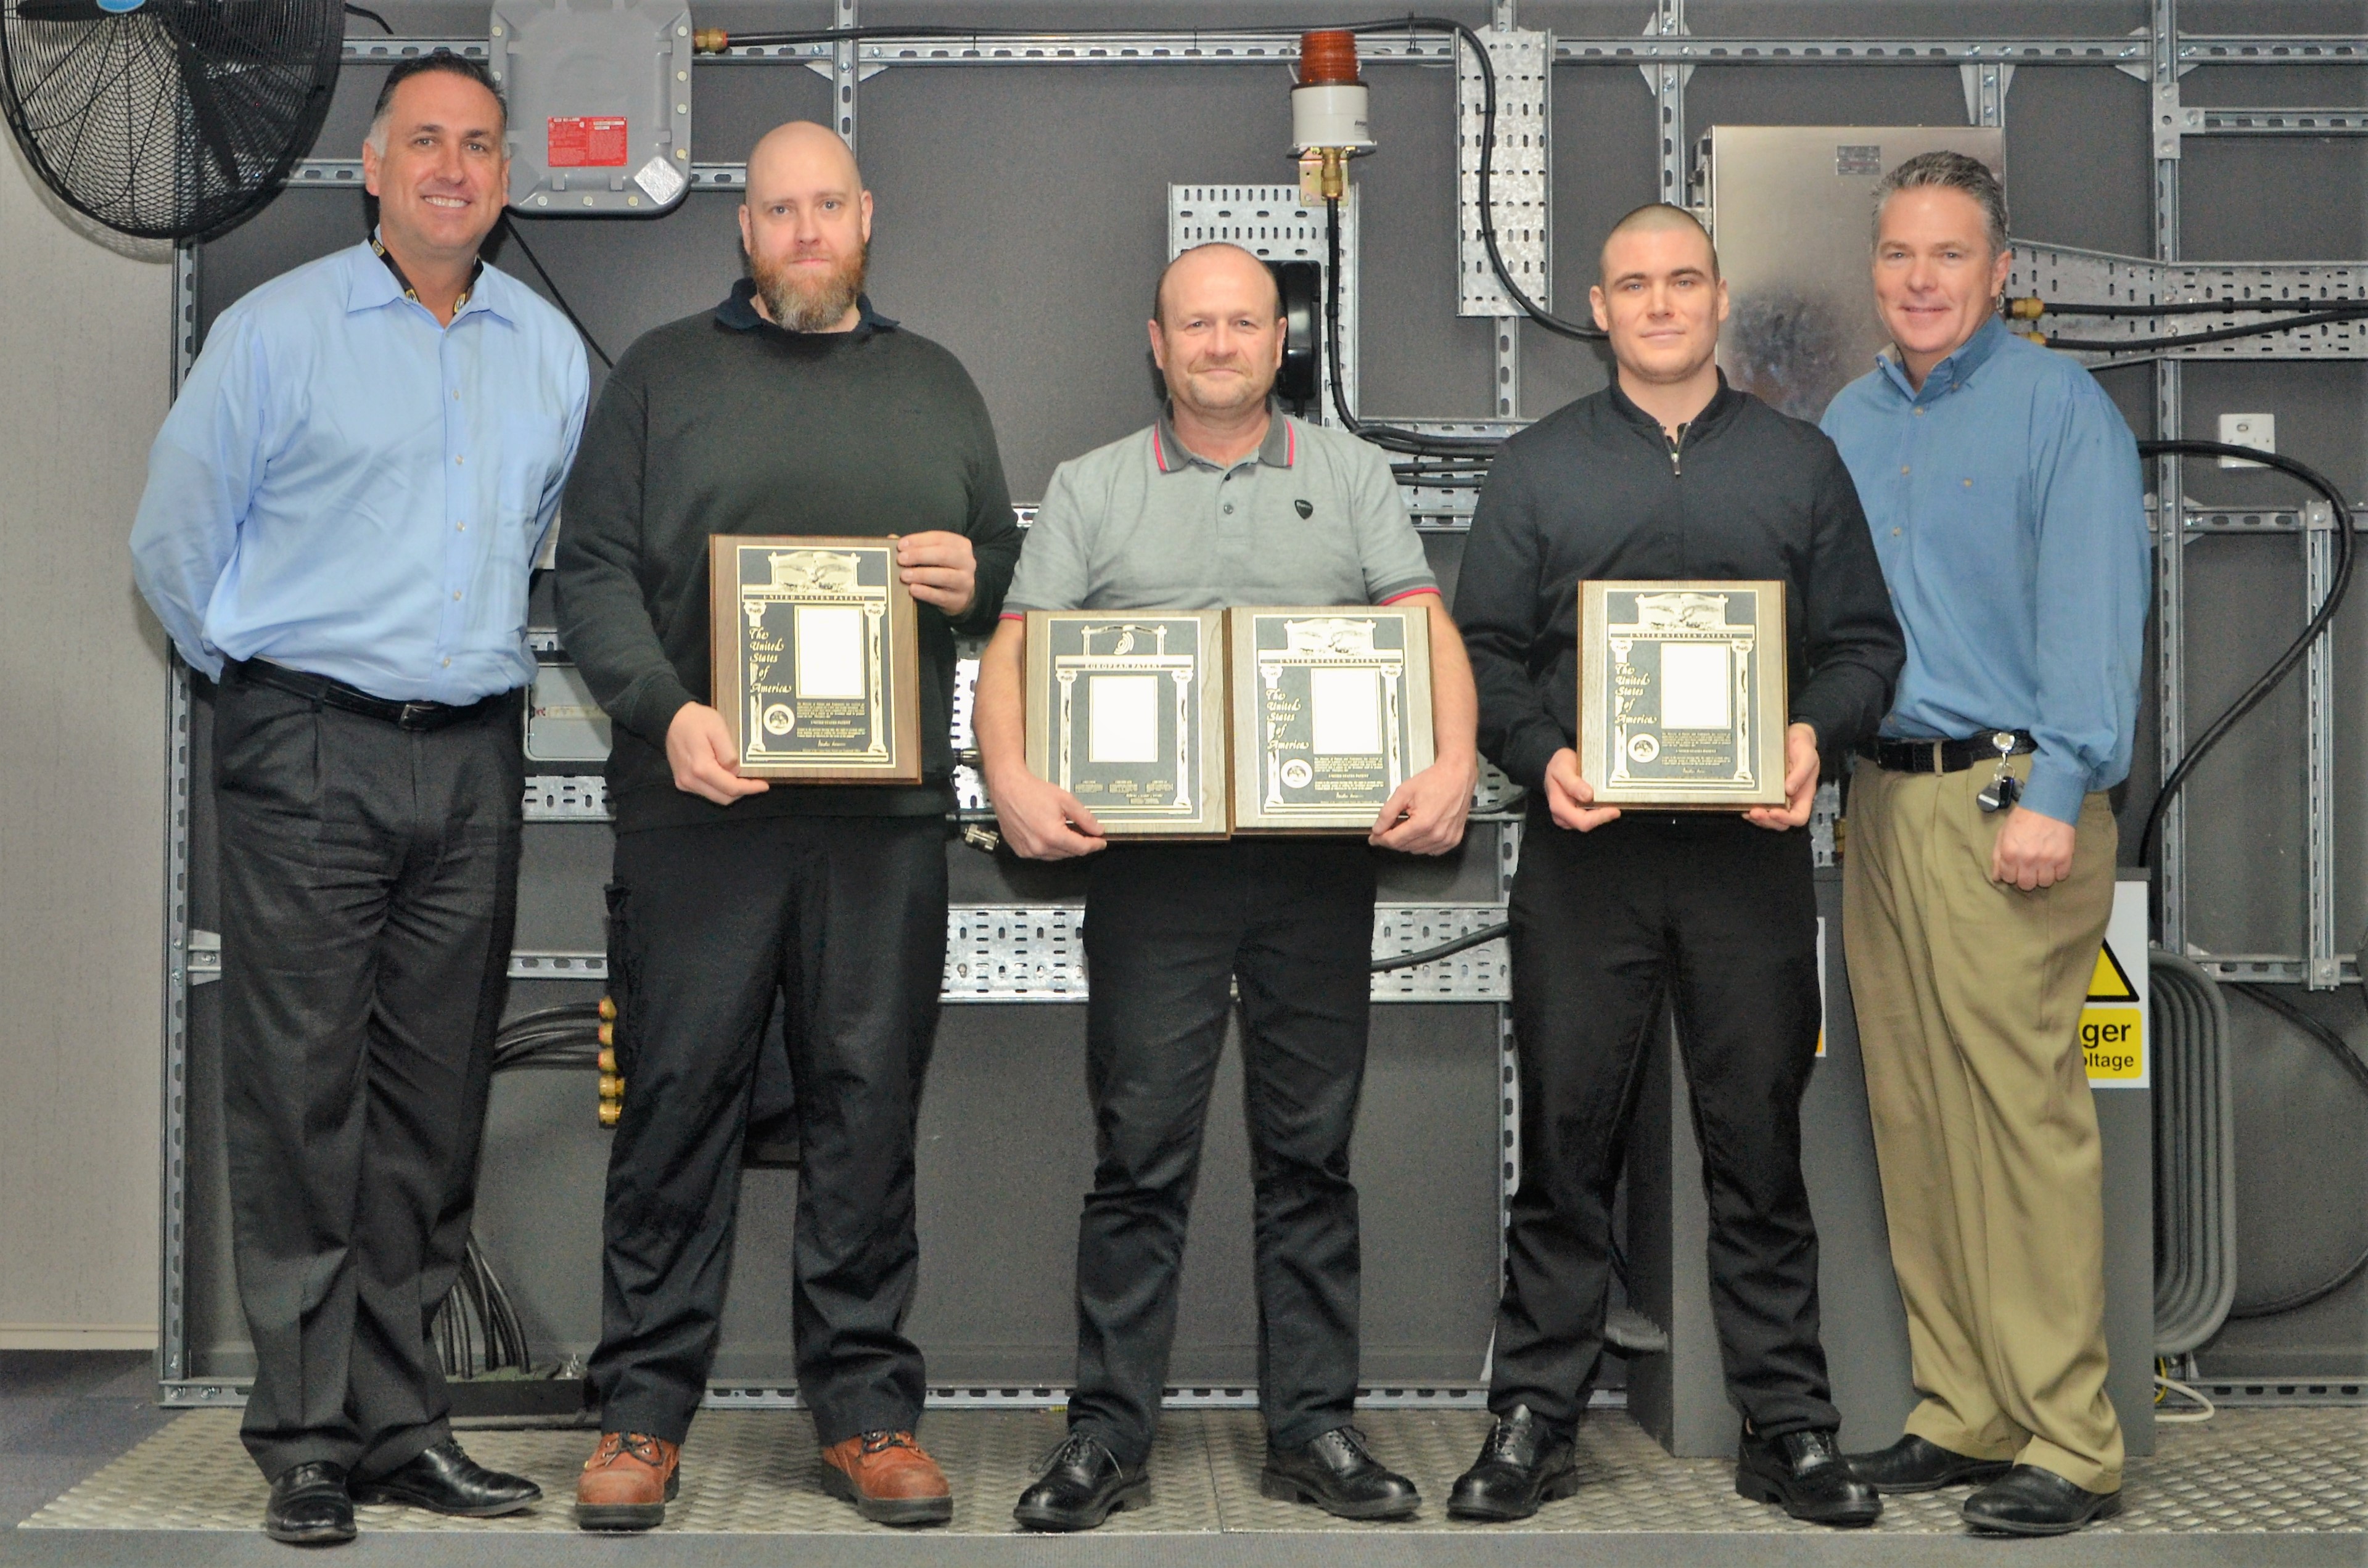 Carl Jackson, Jason Clark and Dean Renshaw are pictured being presented with Hubbell Patent Awards by Warren Jenkins, Vice President and General Manager or Hubbell Inc. and Steve Taafe, Director of Engineering at Killark.